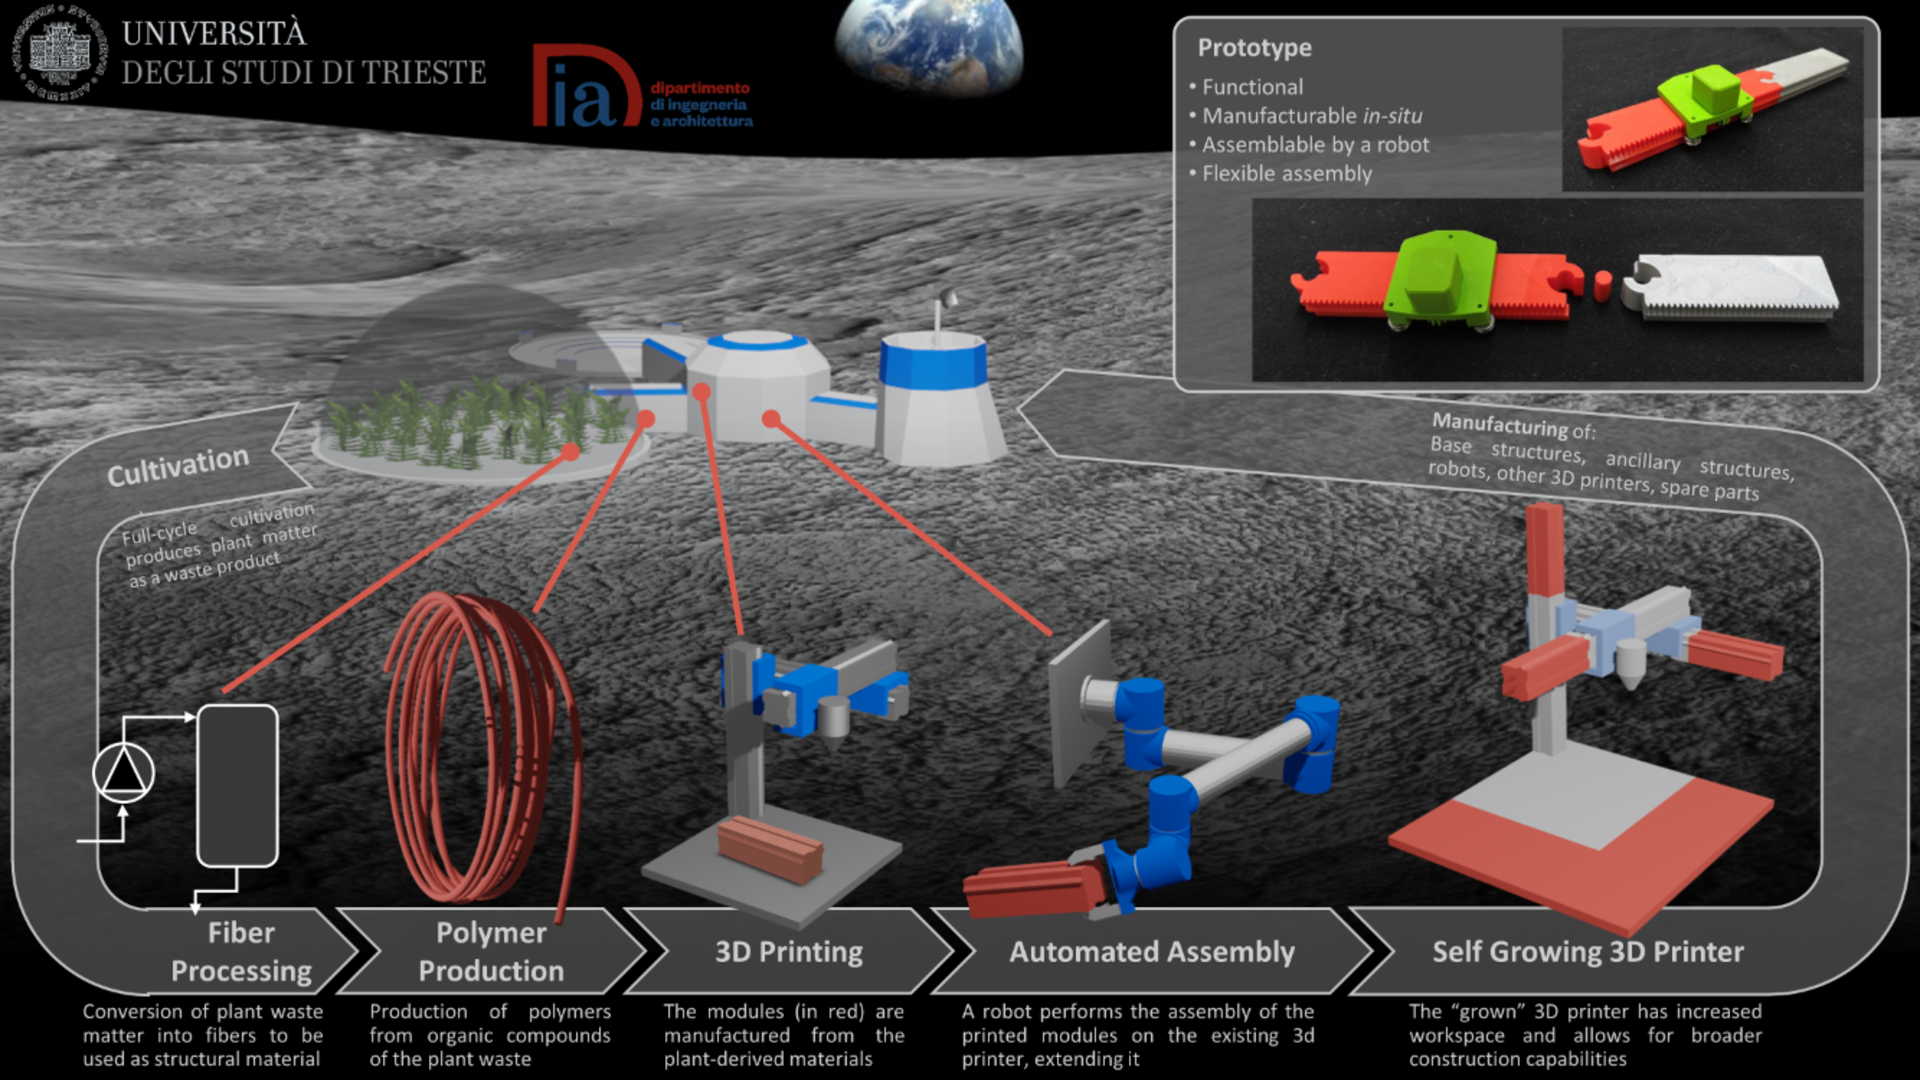 A self-growing 3D printer for the Moon